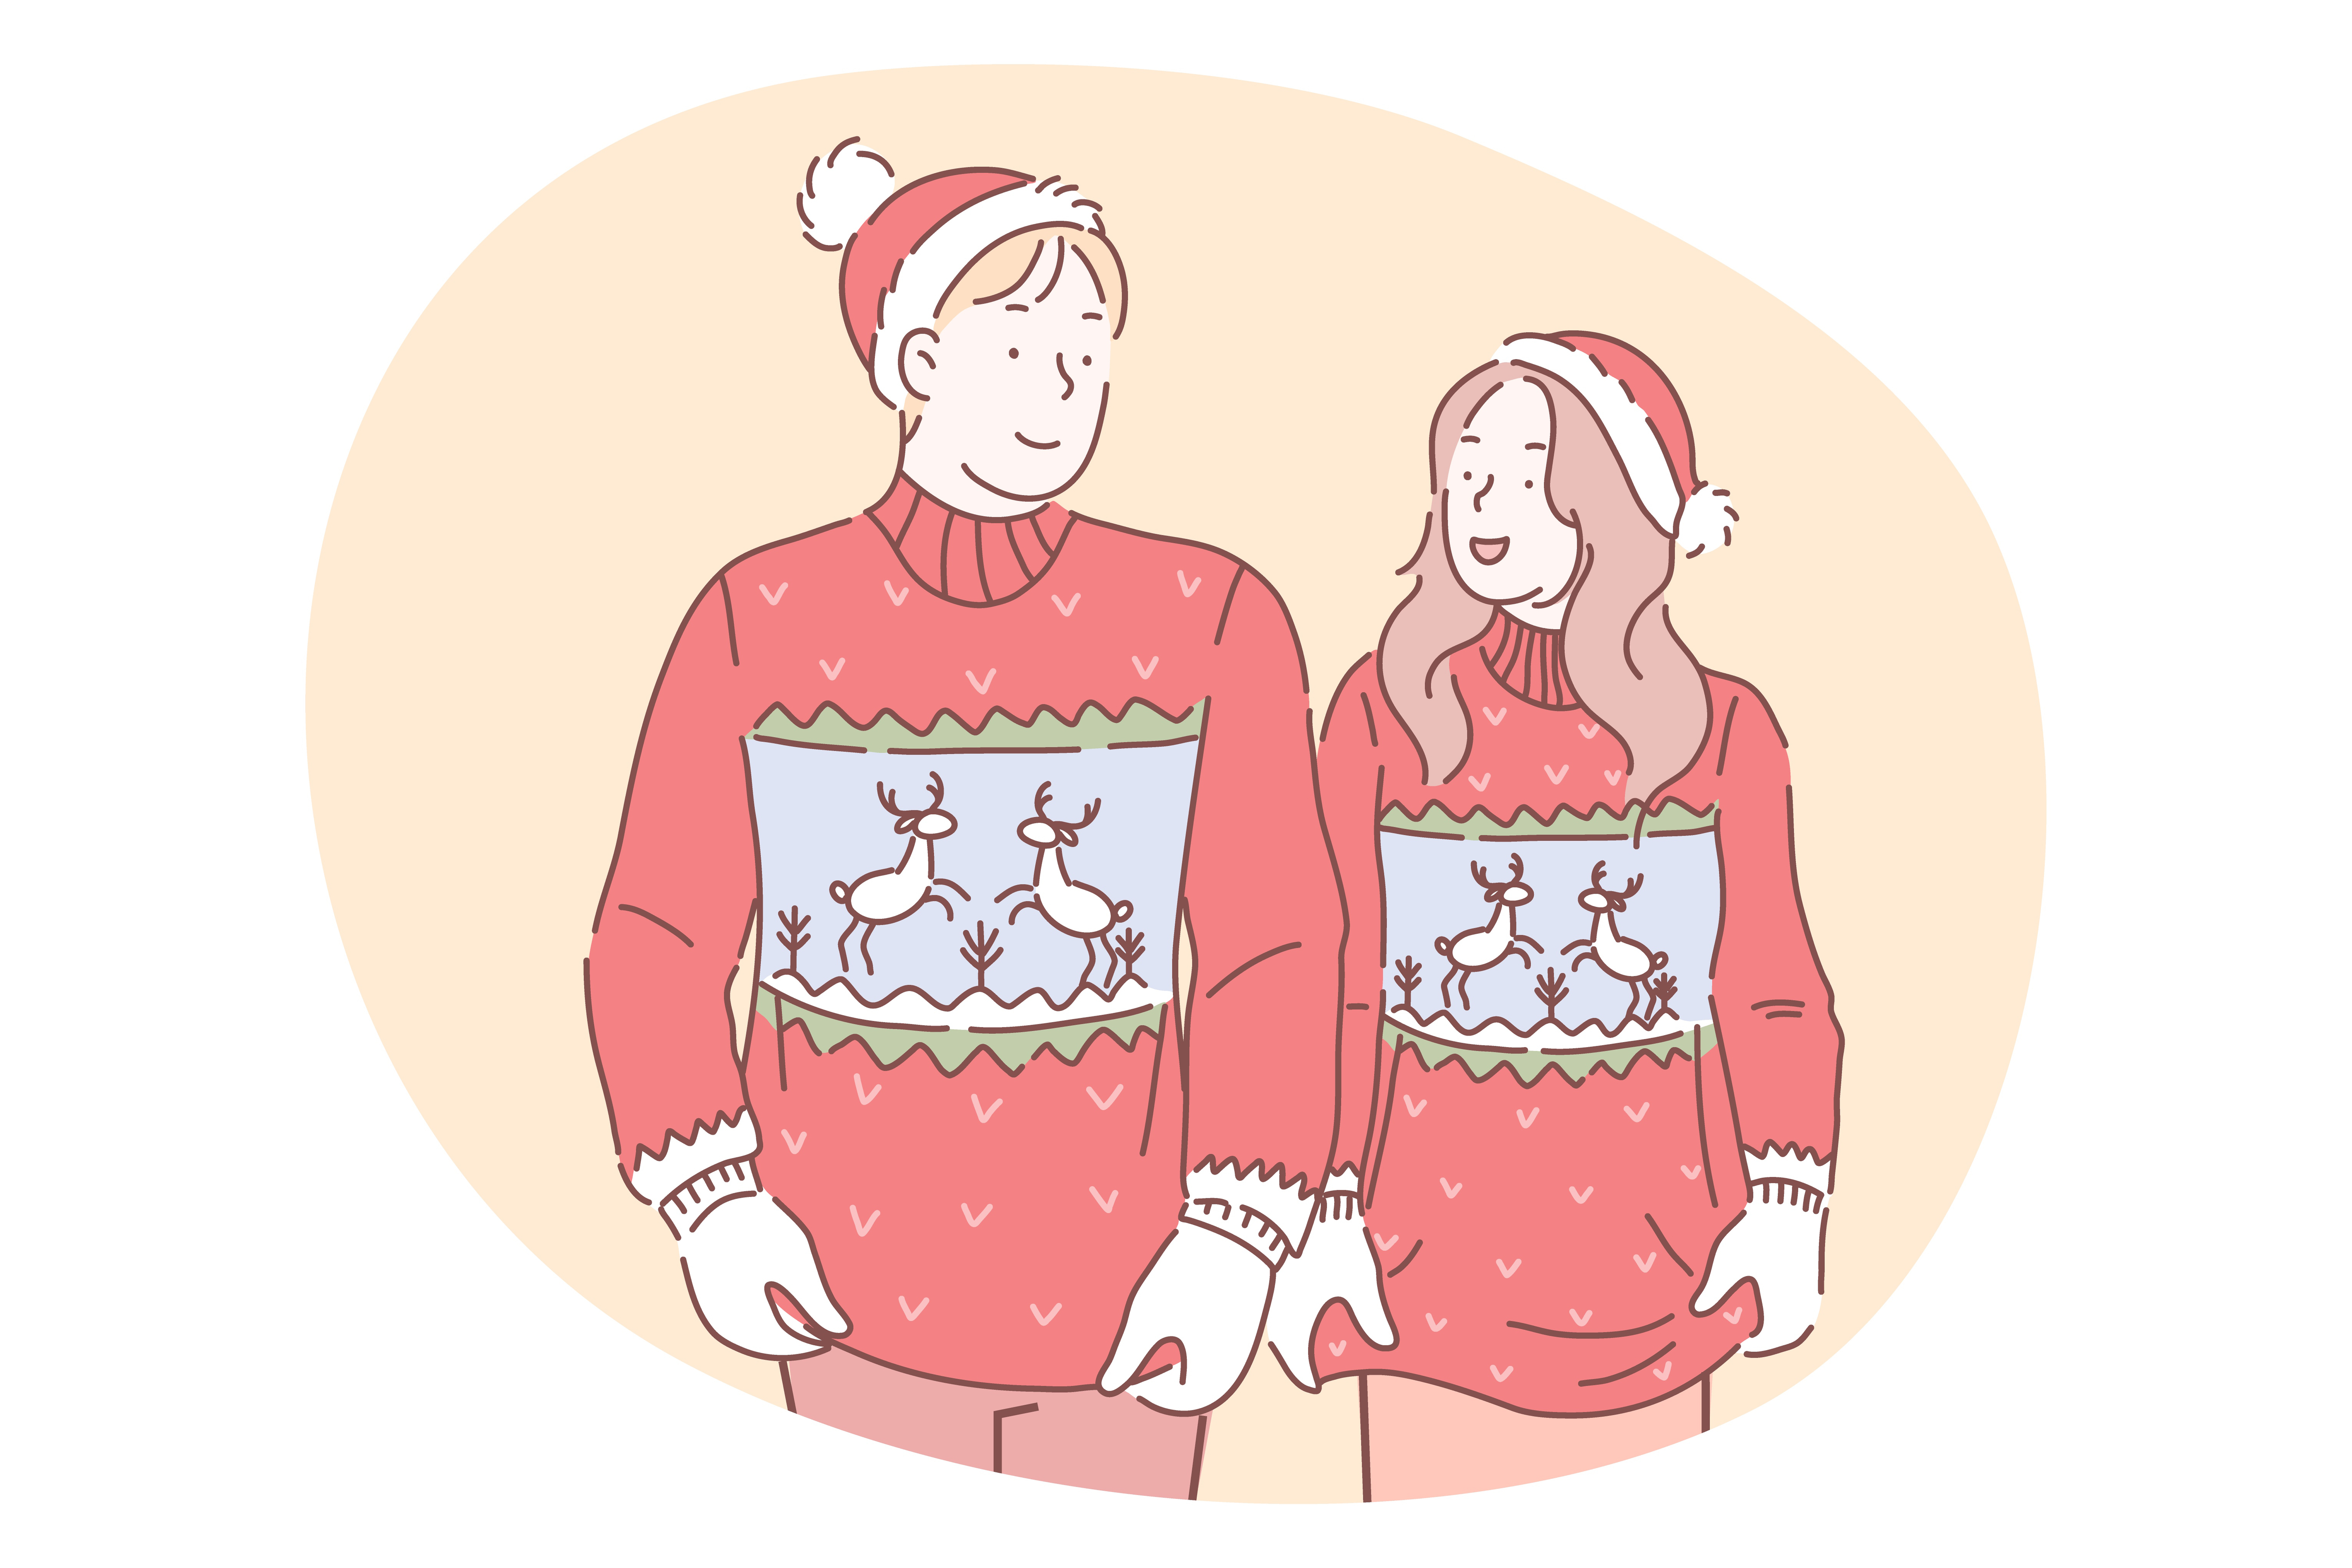 Christmas present, gift, celebration of New Year and winter holidays concept. Smiling young couple in same red sweaters in Santa hats looking at each other during New Year celebration together. Christmas present, gift, celebration of New Year and winter holidays concept